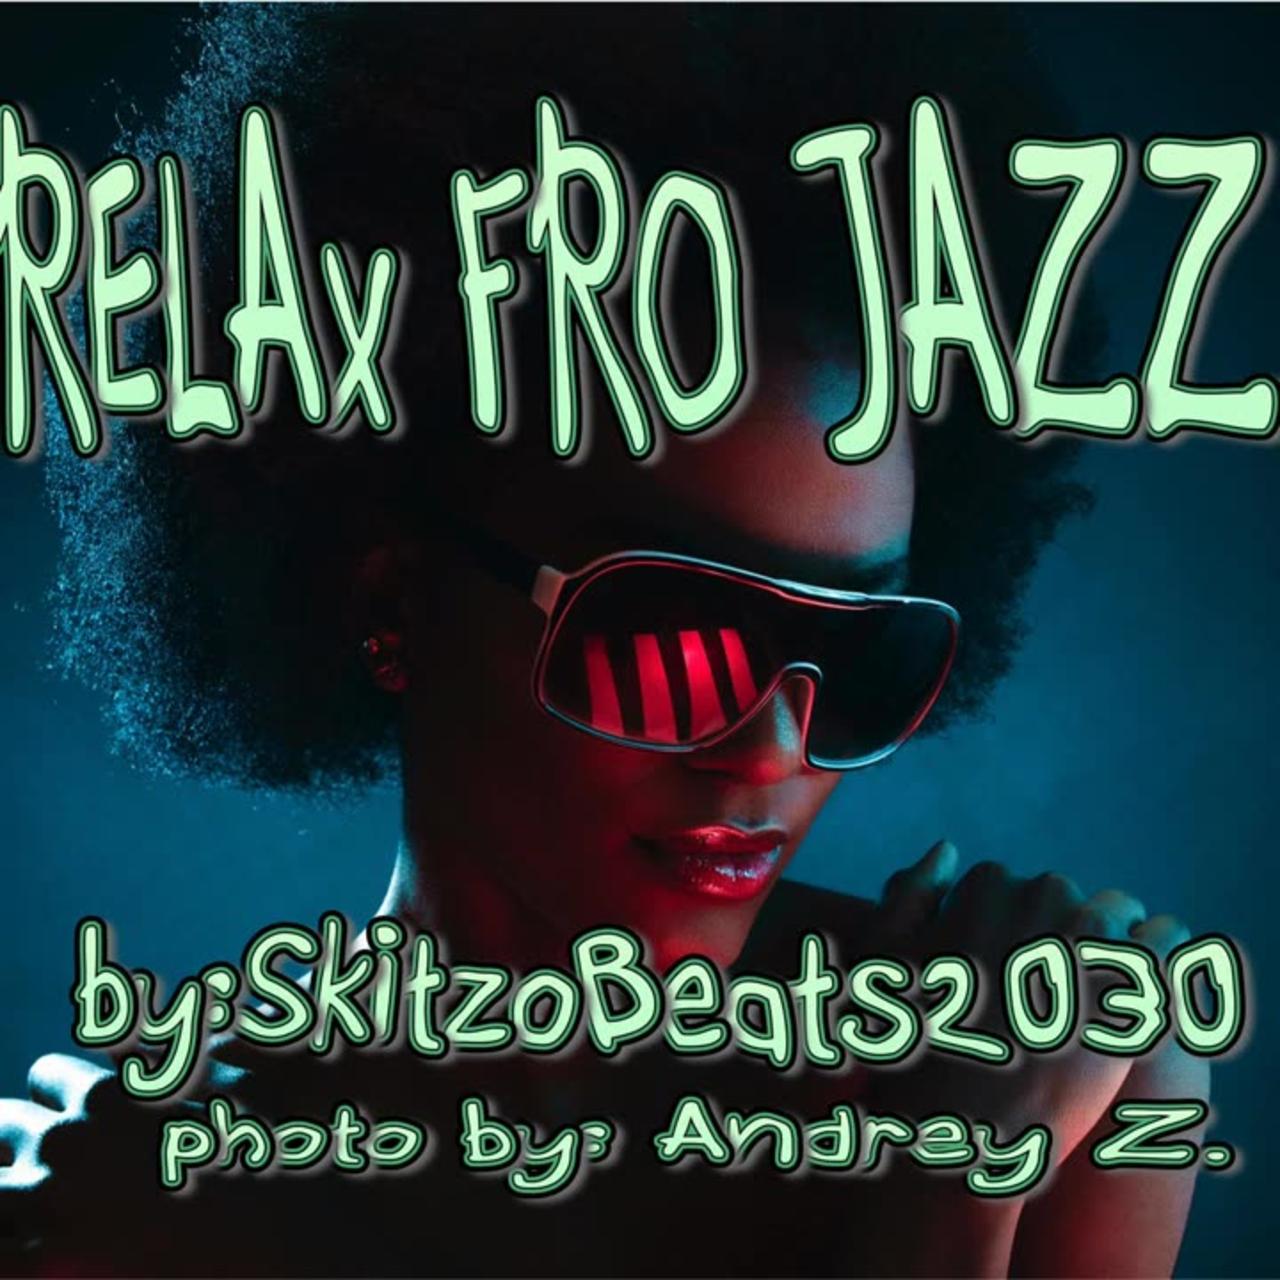 ReLaX Fro Jazz